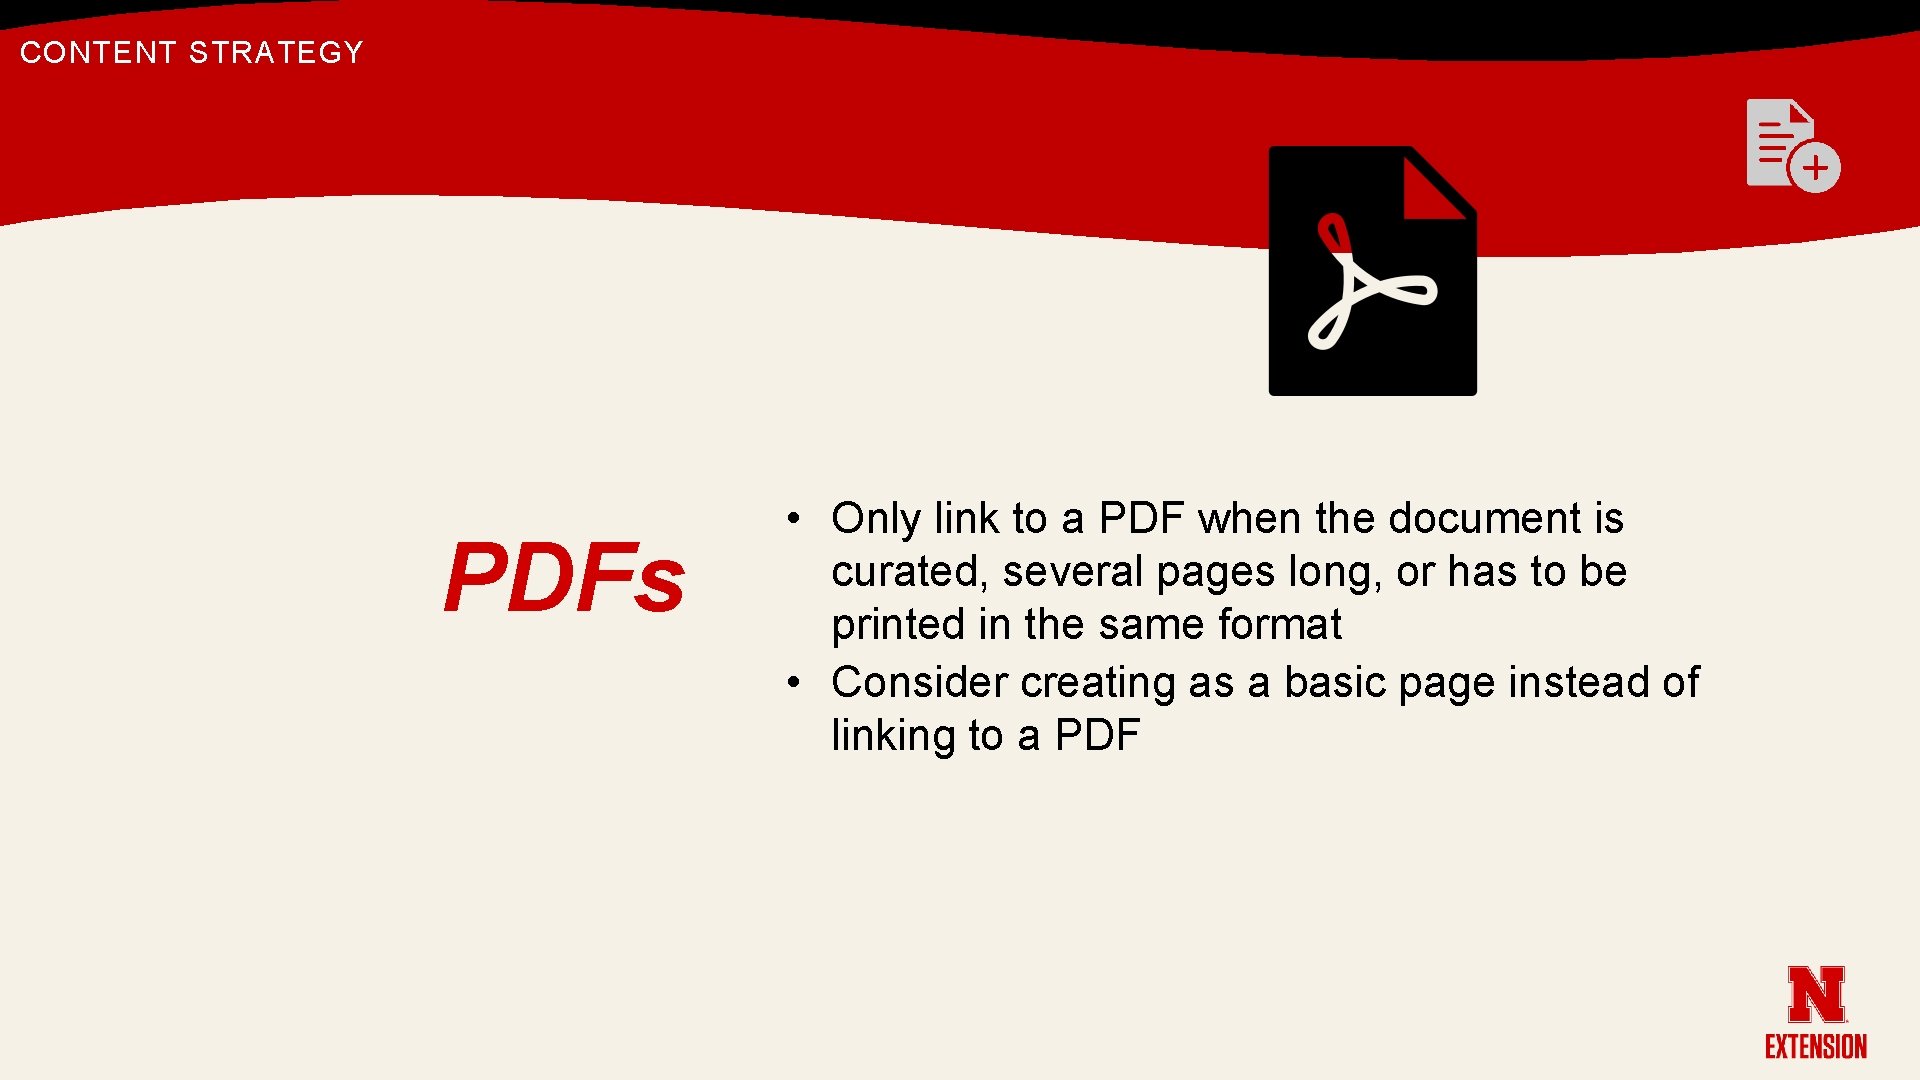 CONTENT STRATEGY PDFs • Only link to a PDF when the document is curated,